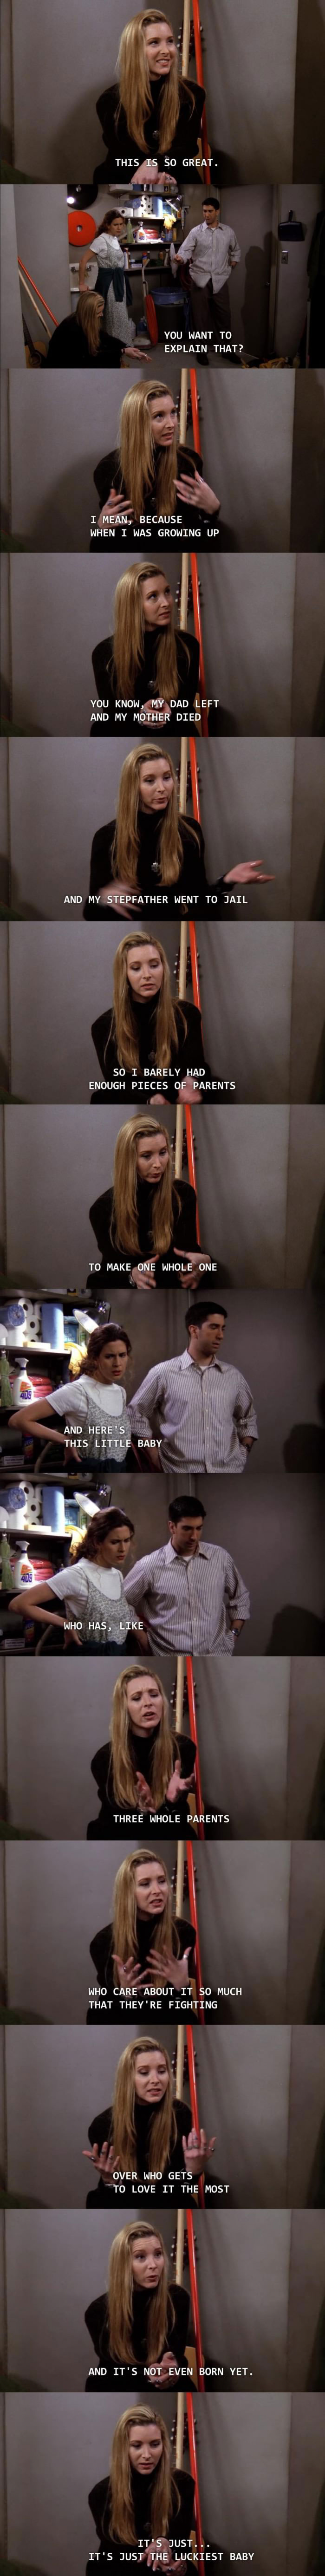 phoebe from friends on family and parenting, da feels